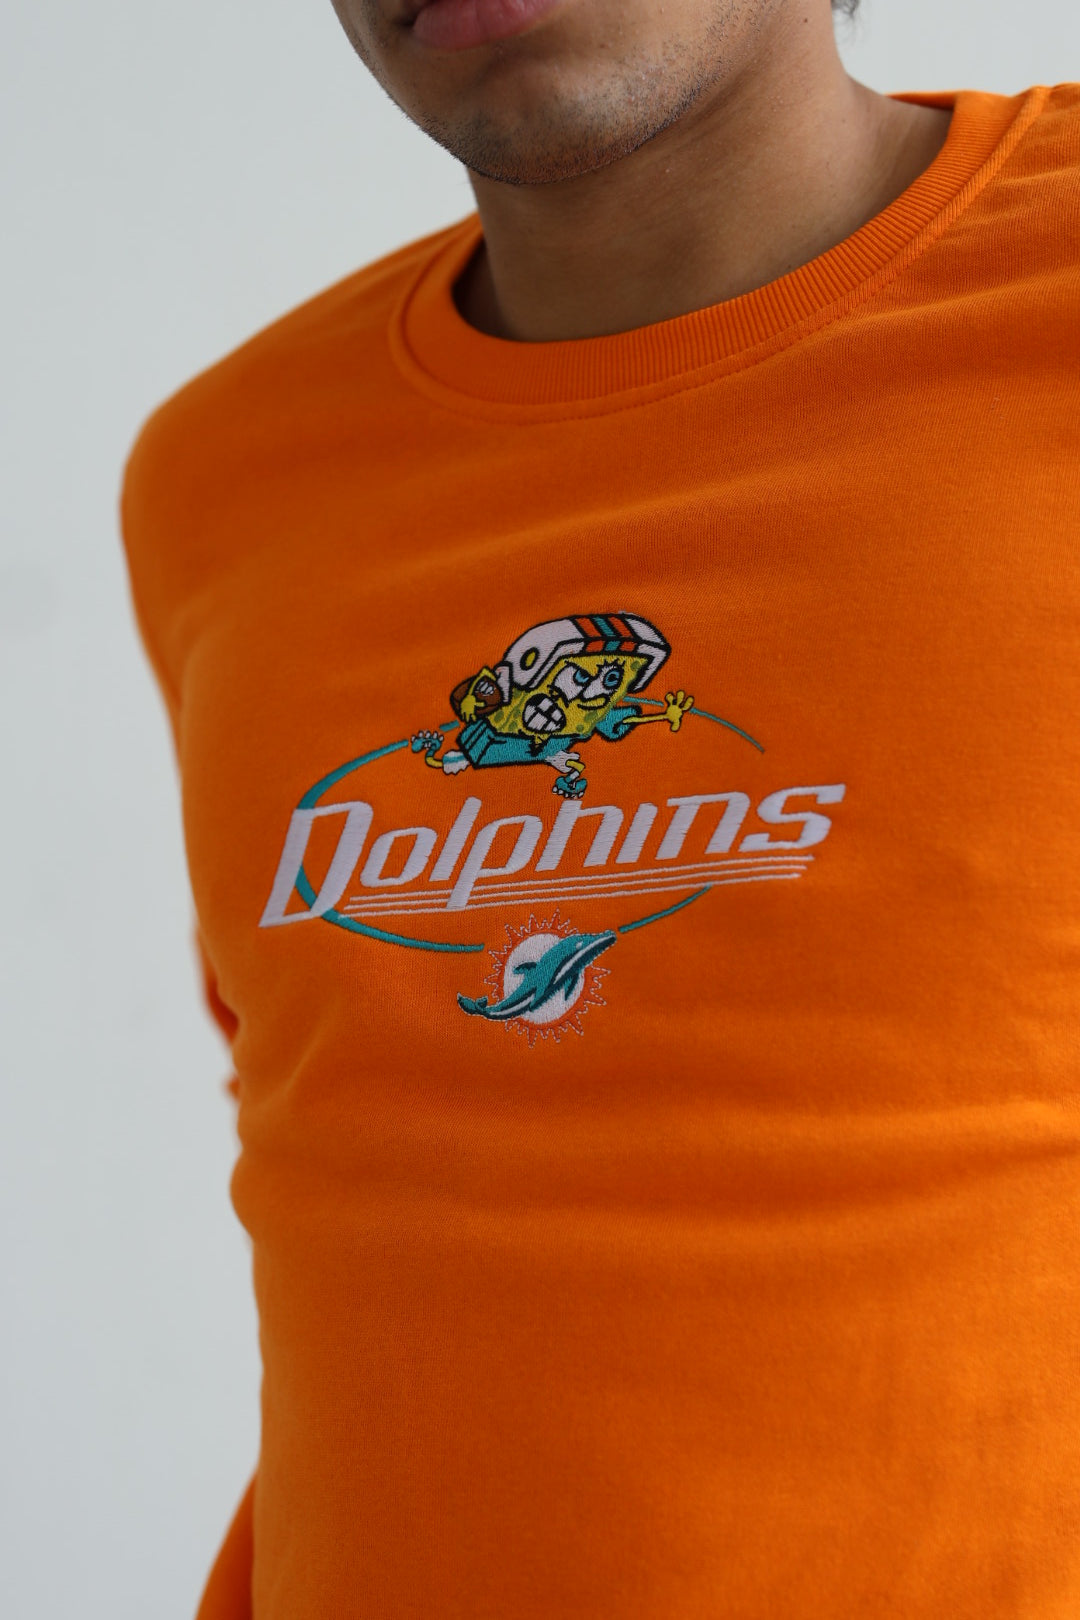 NFL x Nickelodeon Embroidered Crewneck - Miami Dolphins